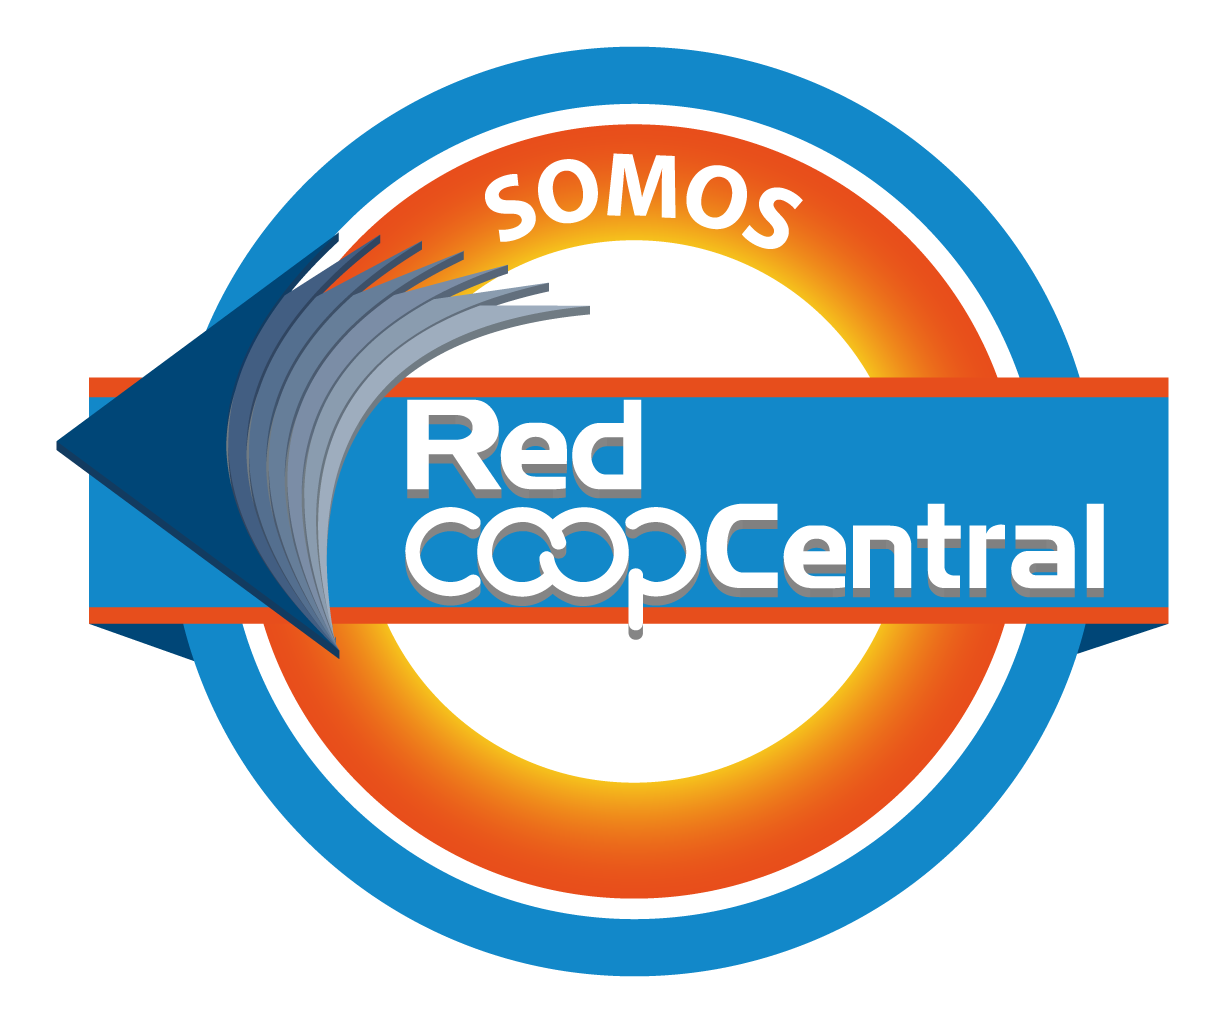 Update red coopcentral